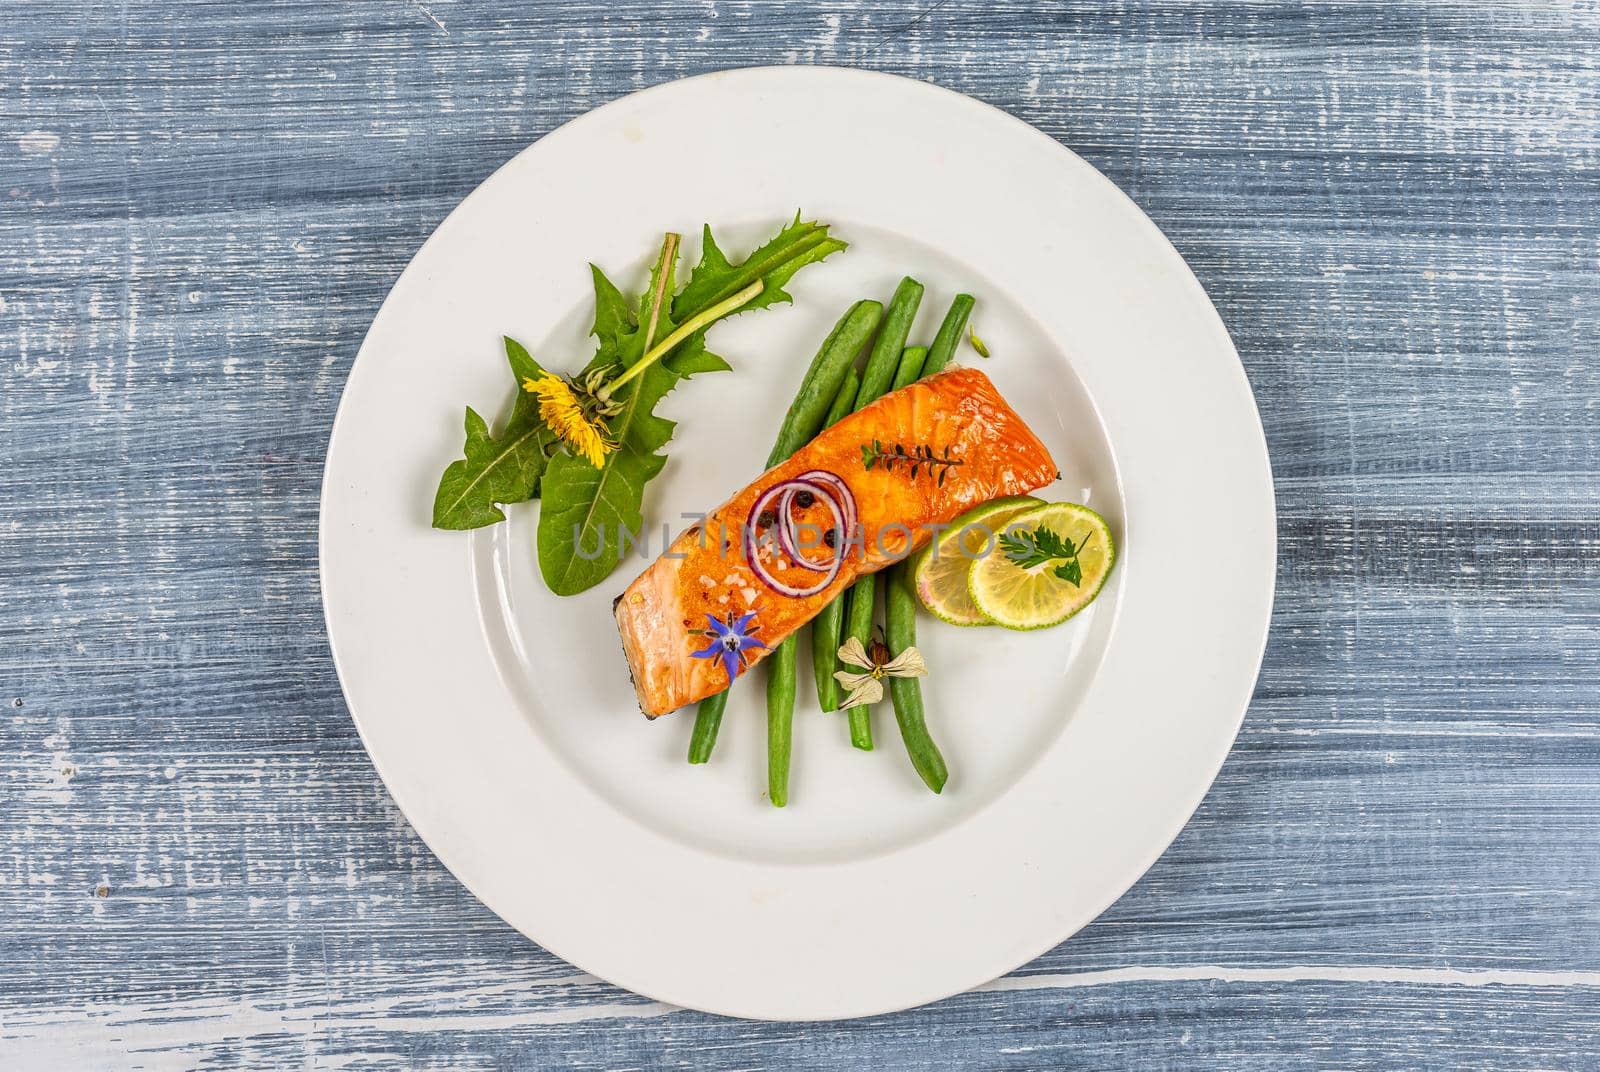 Salmon with green beans and edible flowers, and arugula by JPC-PROD